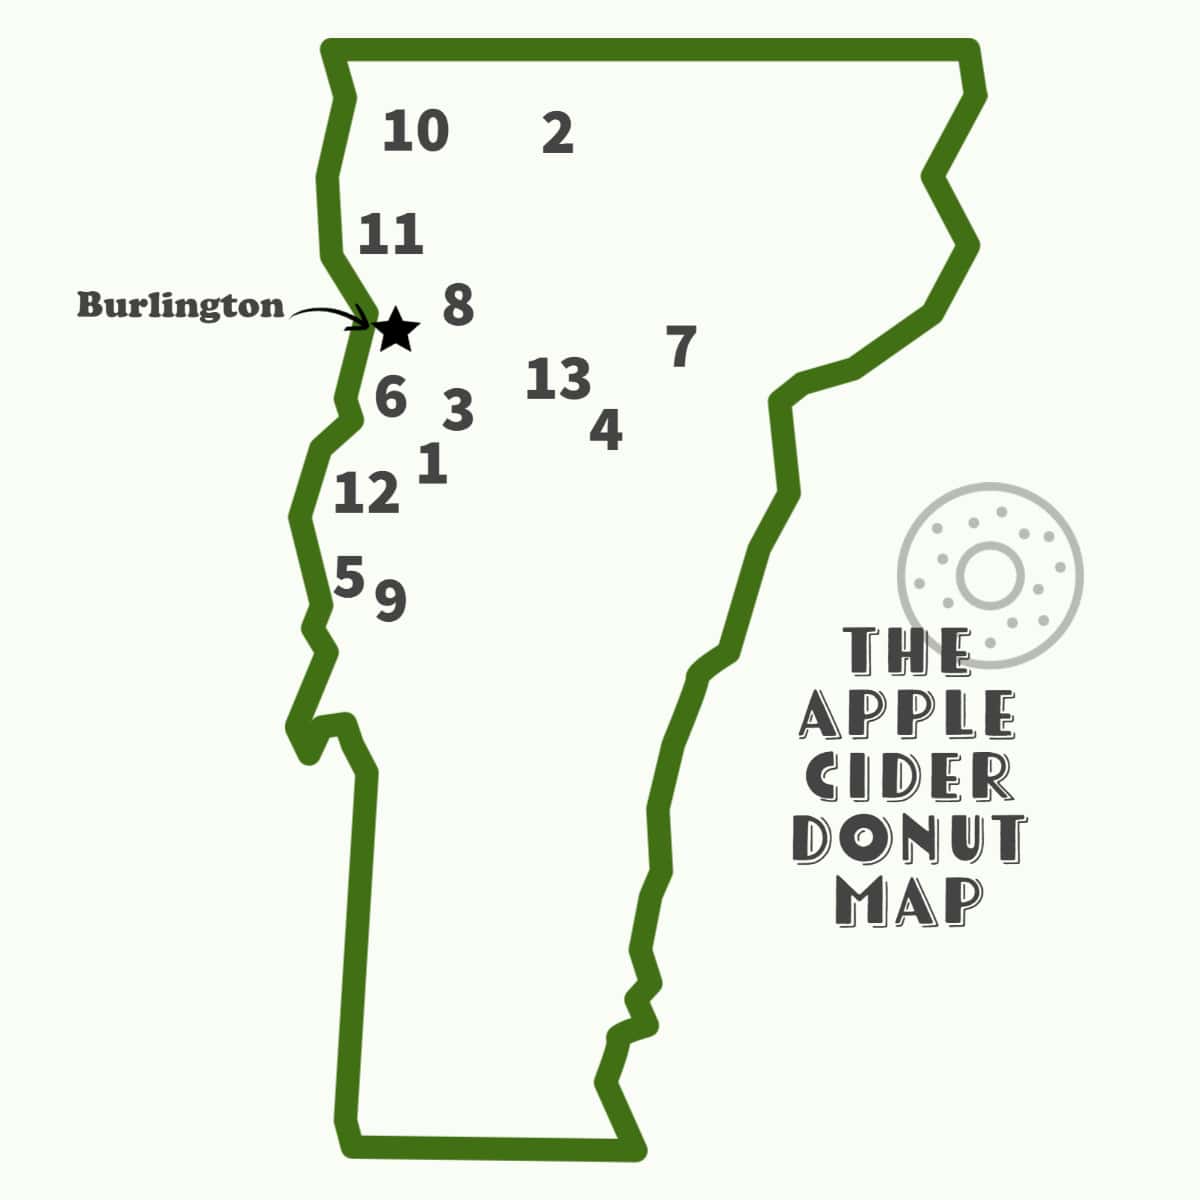 Graphic of Vermont with numbered locations.